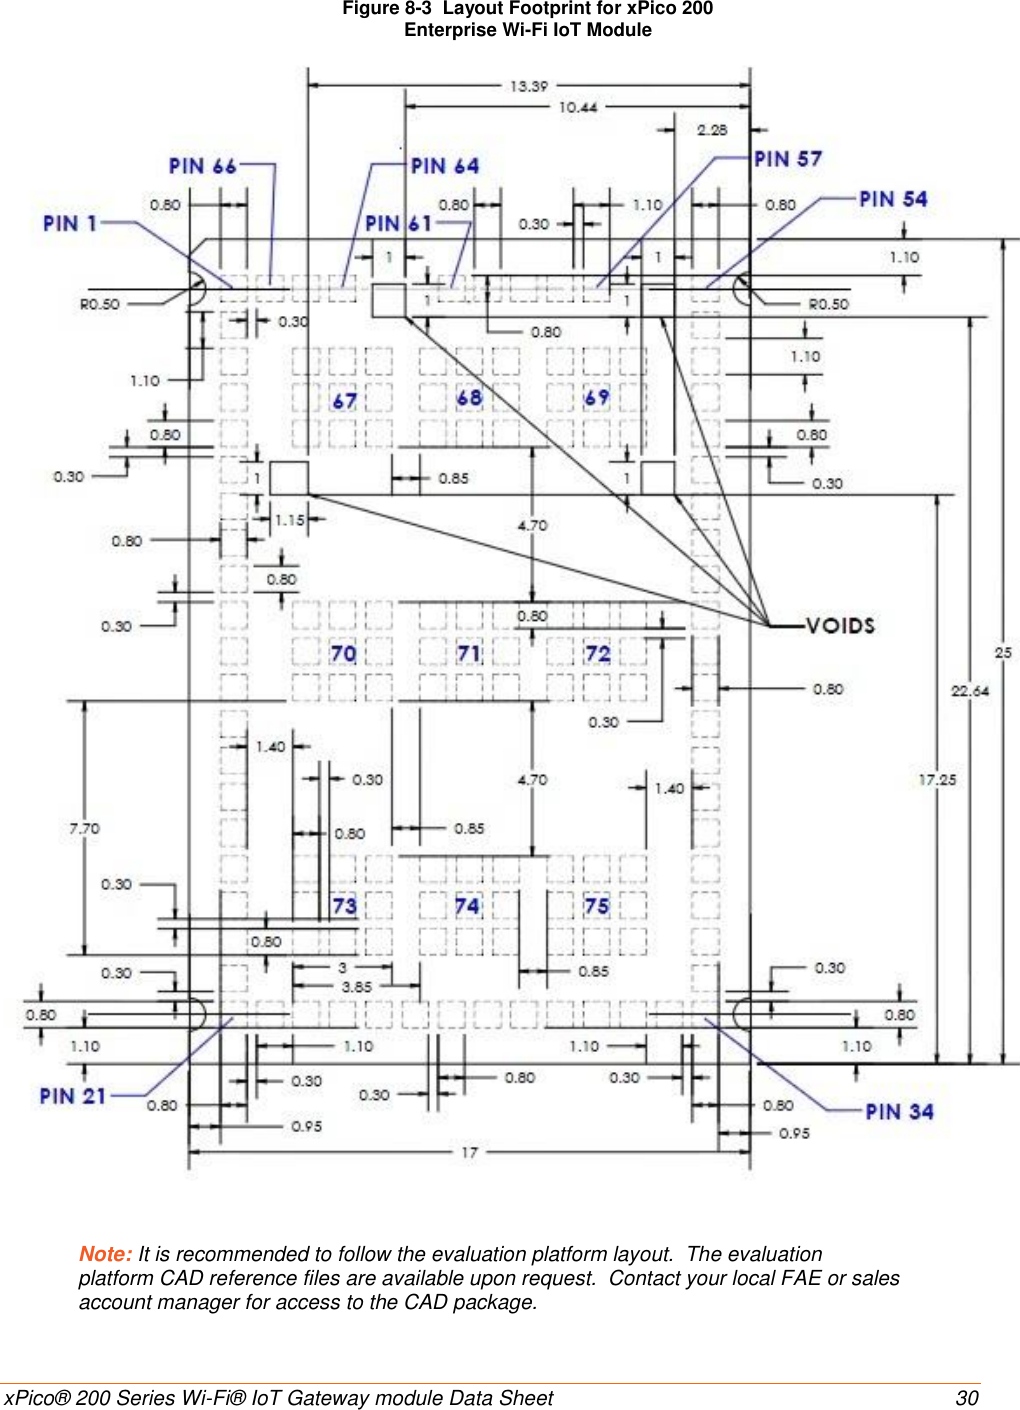    xPico® 200 Series Wi-Fi® IoT Gateway module Data Sheet  30 Figure 8-3  Layout Footprint for xPico 200  Enterprise Wi-Fi IoT Module   Note: It is recommended to follow the evaluation platform layout.  The evaluation platform CAD reference files are available upon request.  Contact your local FAE or sales account manager for access to the CAD package.  